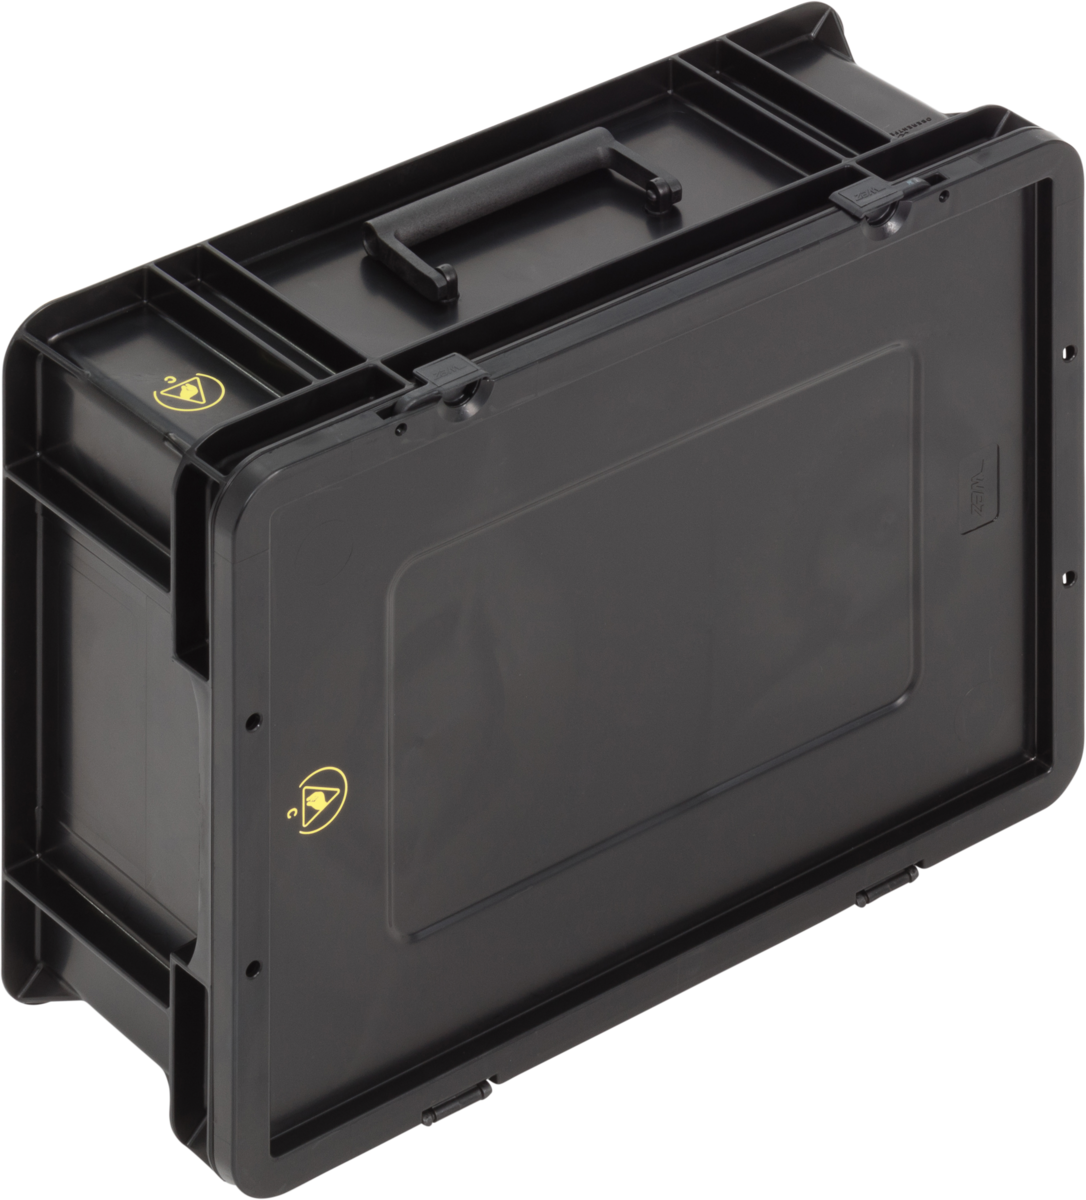 ESD-Safe-SGL-Norm-Carrying-Cases-Flat-Base-007-Ref.-4313.397.992_1004381_400x300x154_03